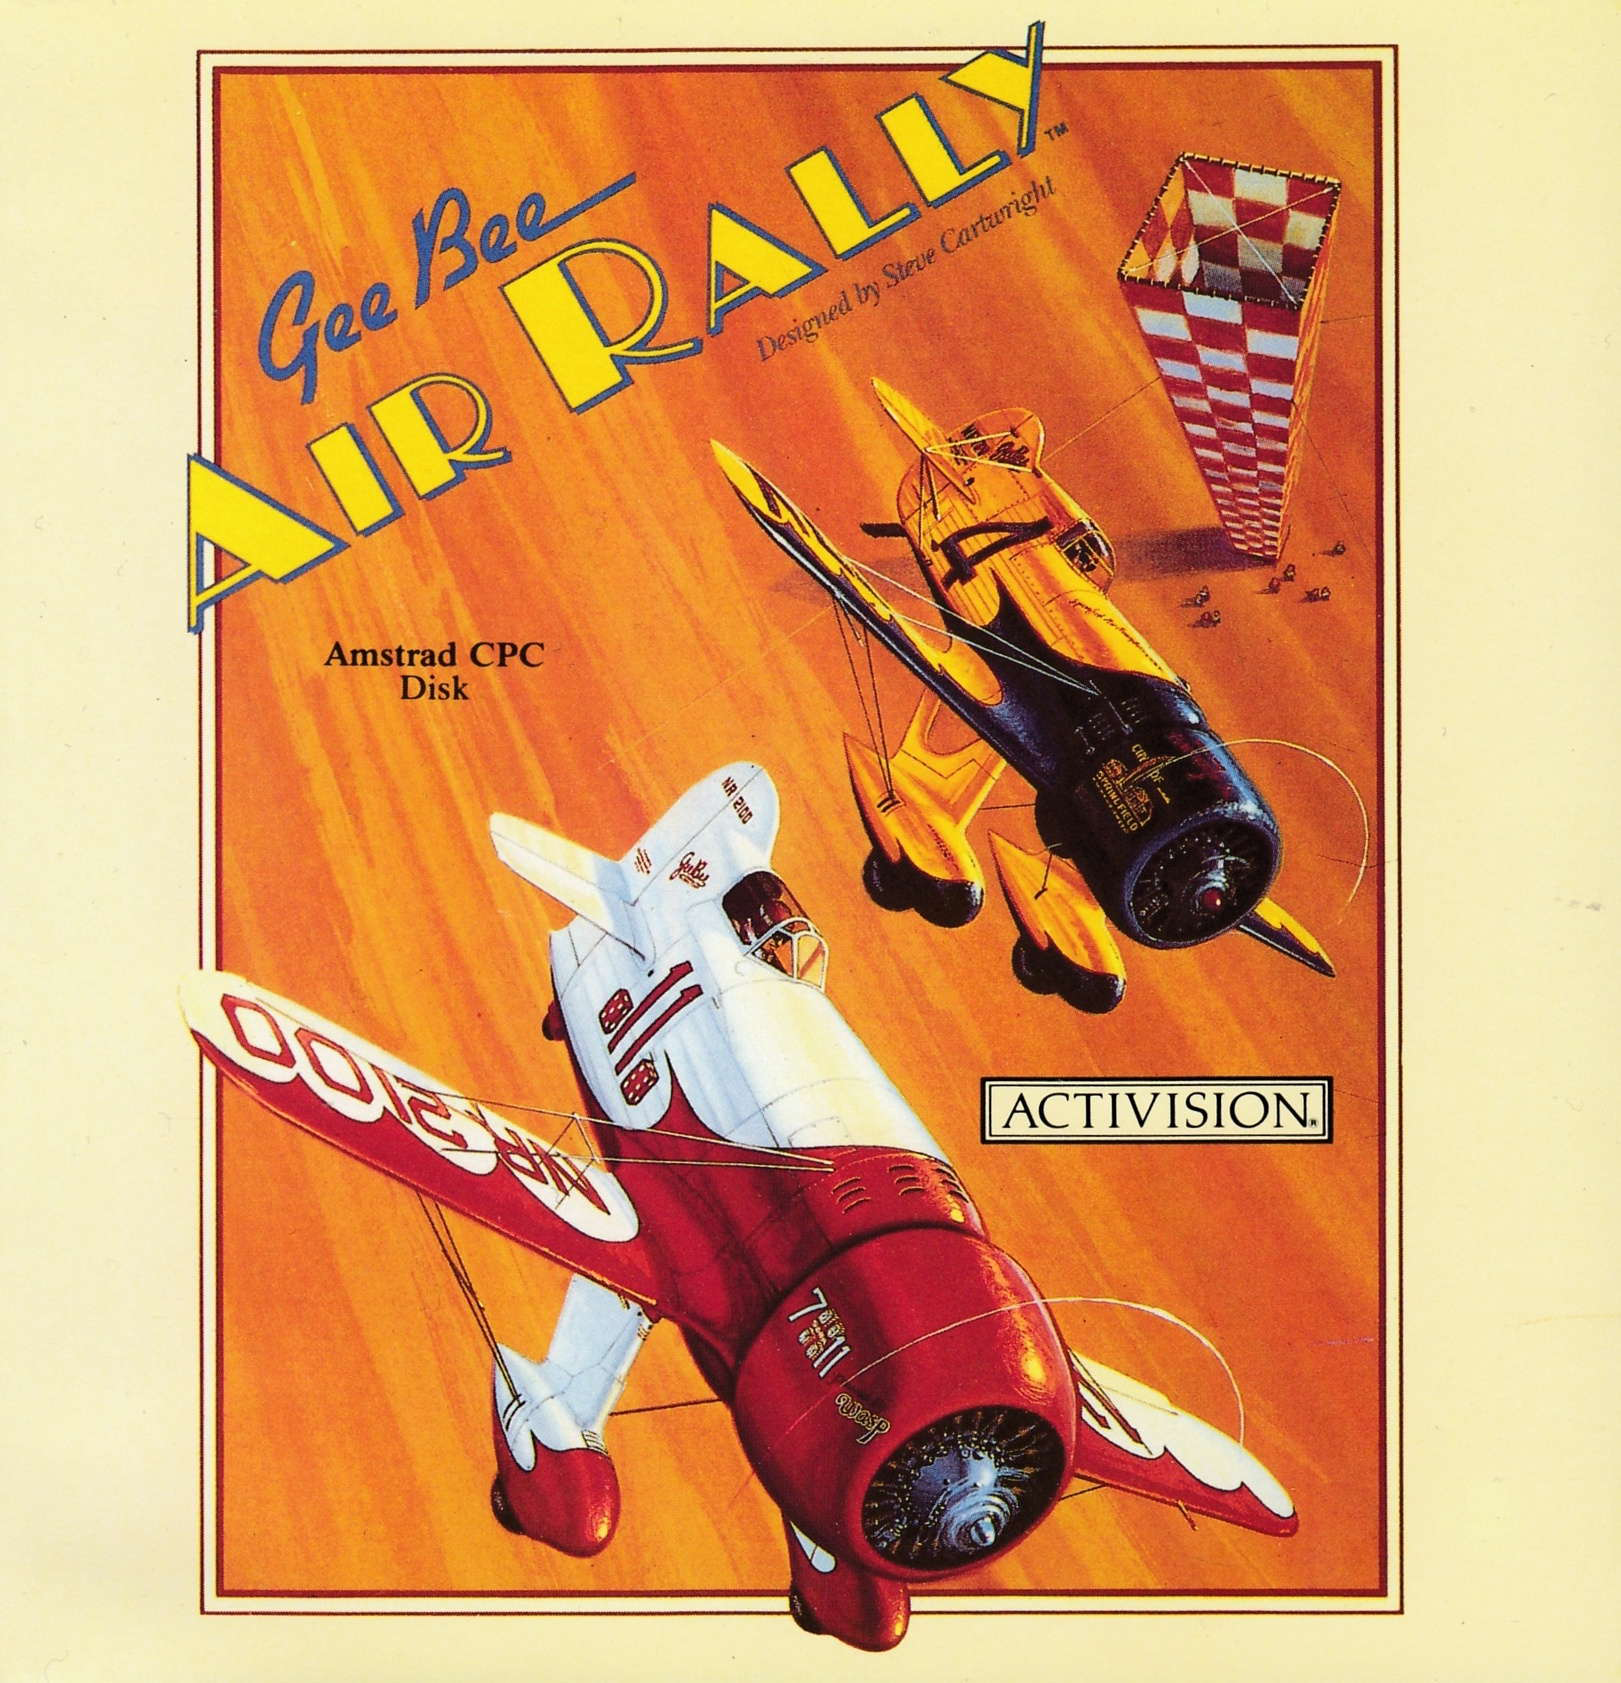 cover of the Amstrad CPC game Gee Bee Air Rally  by GameBase CPC